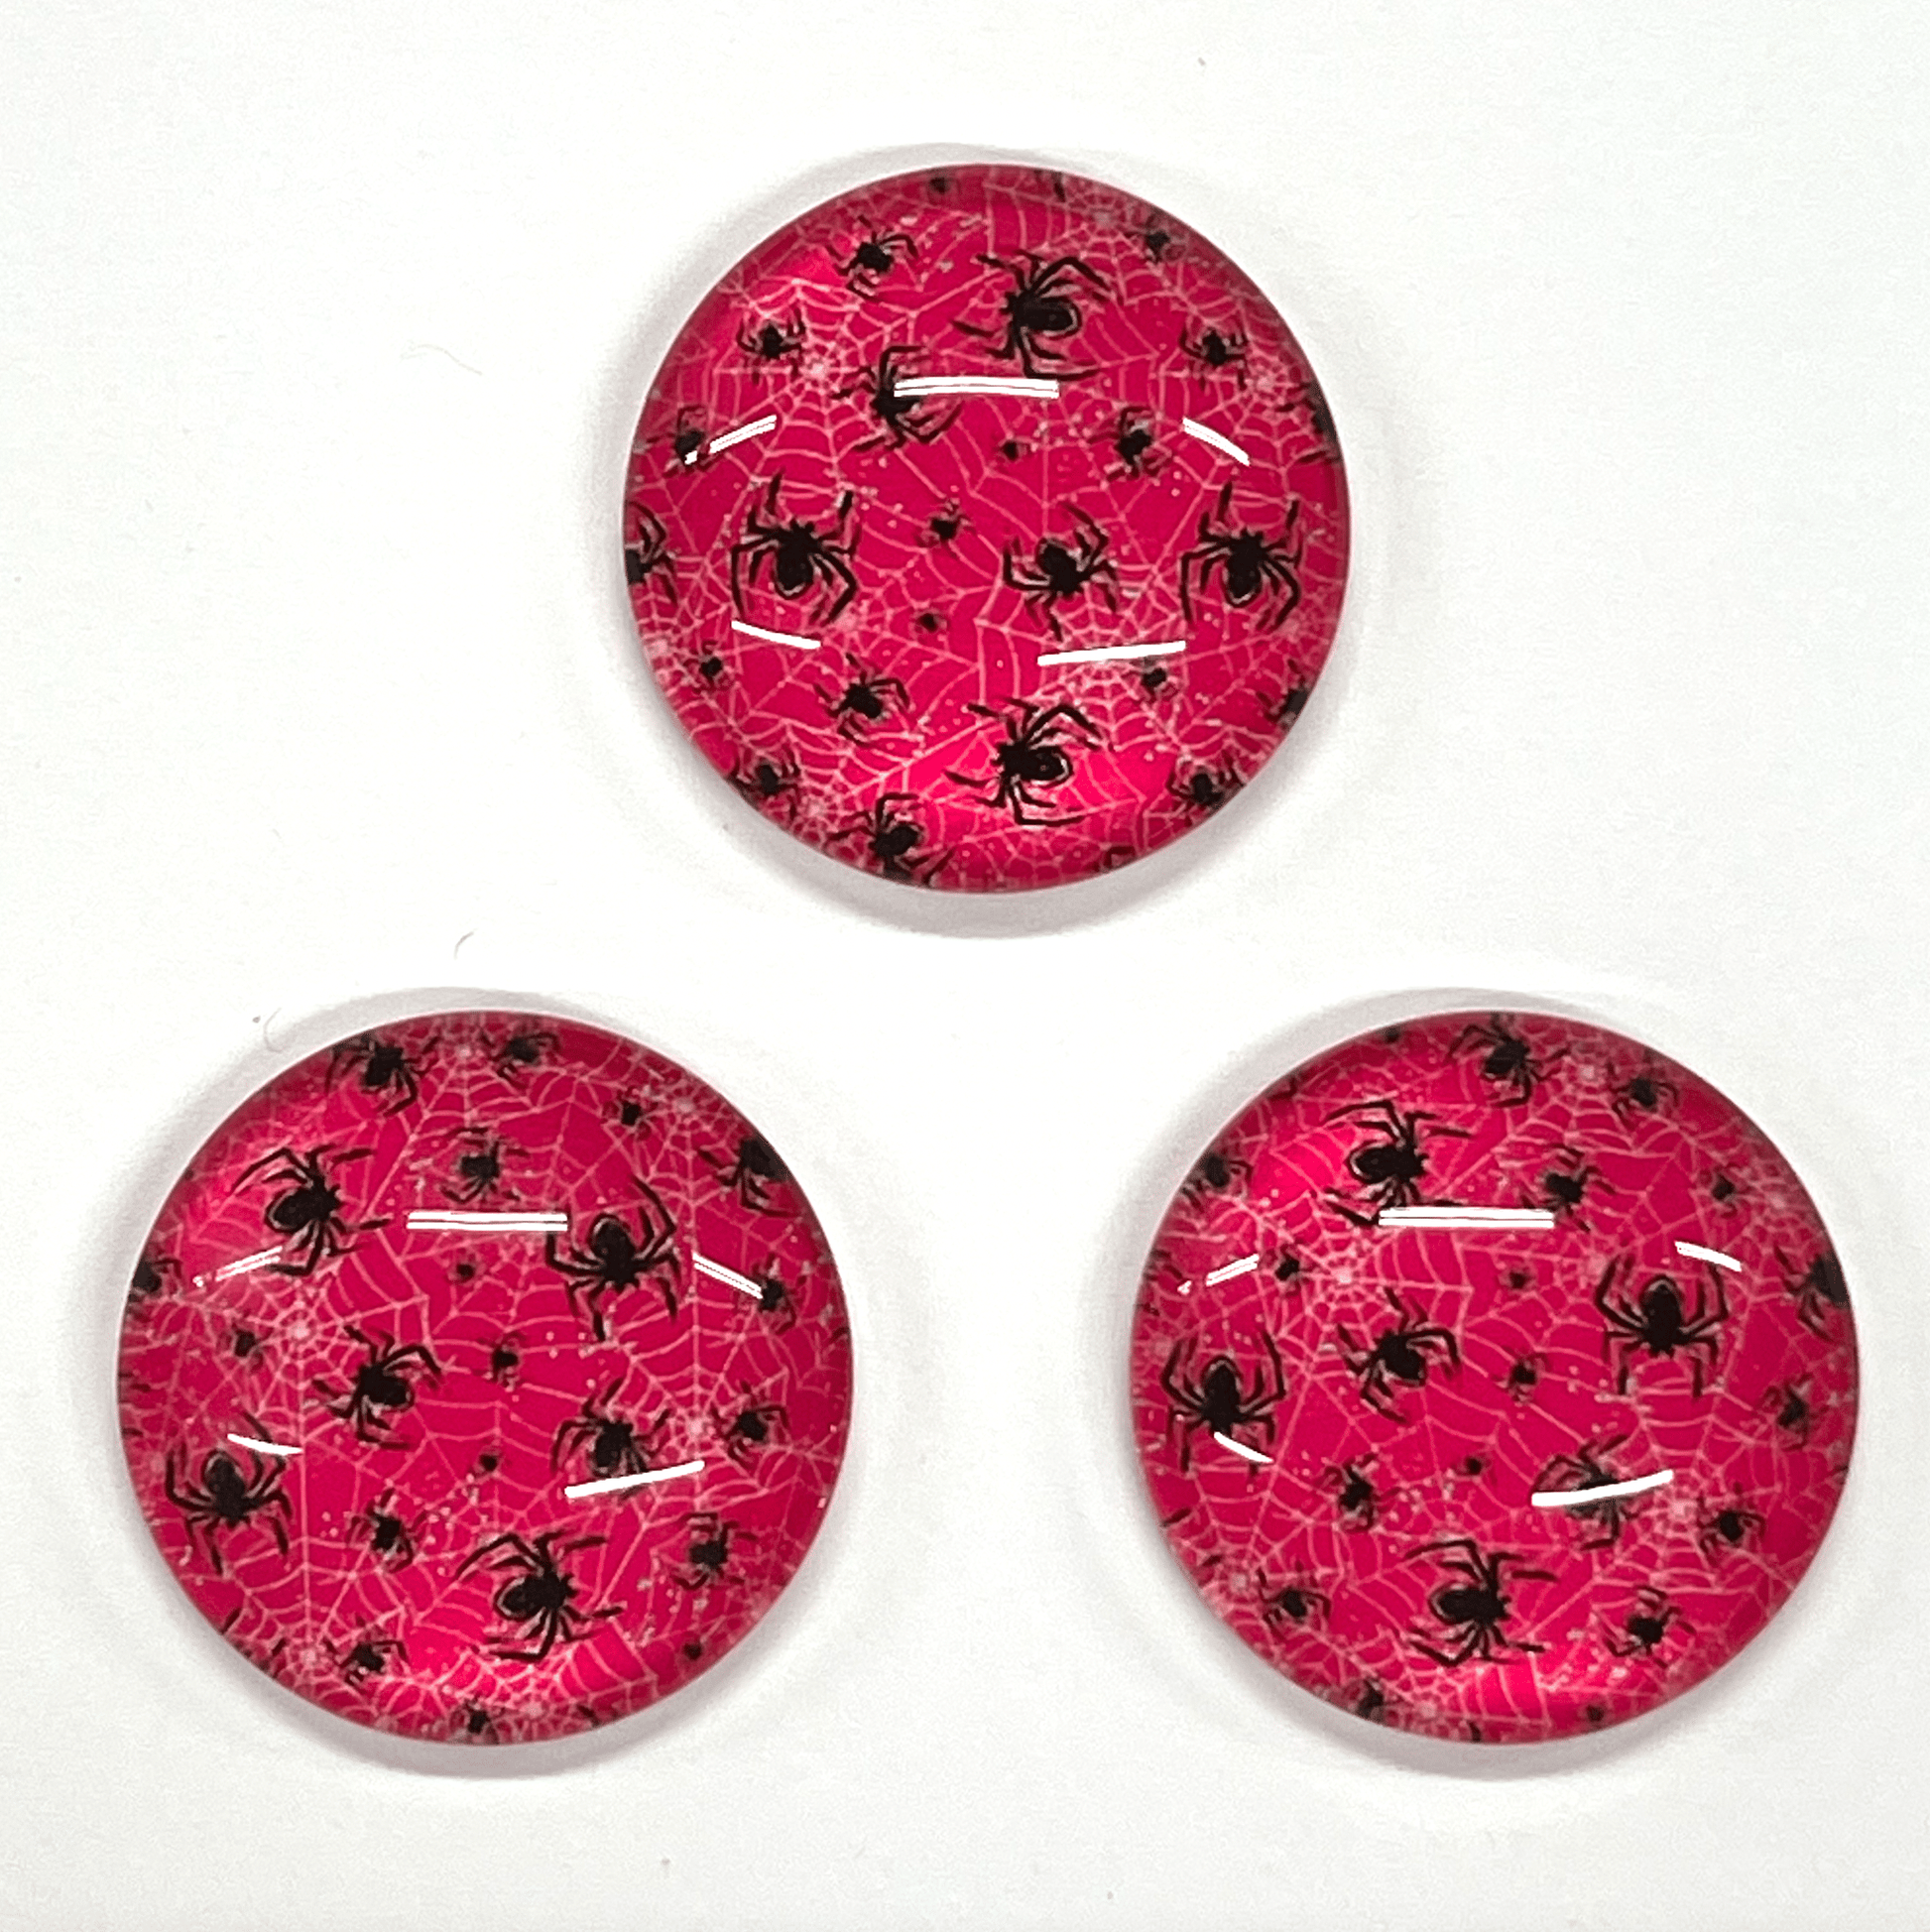 Sundaylace Creations & Bling Resin Gems 22mm "Spiderman" on Red Halloween background round, Glue on, Acrylic Printed Resin Gem (Sold in Pair)